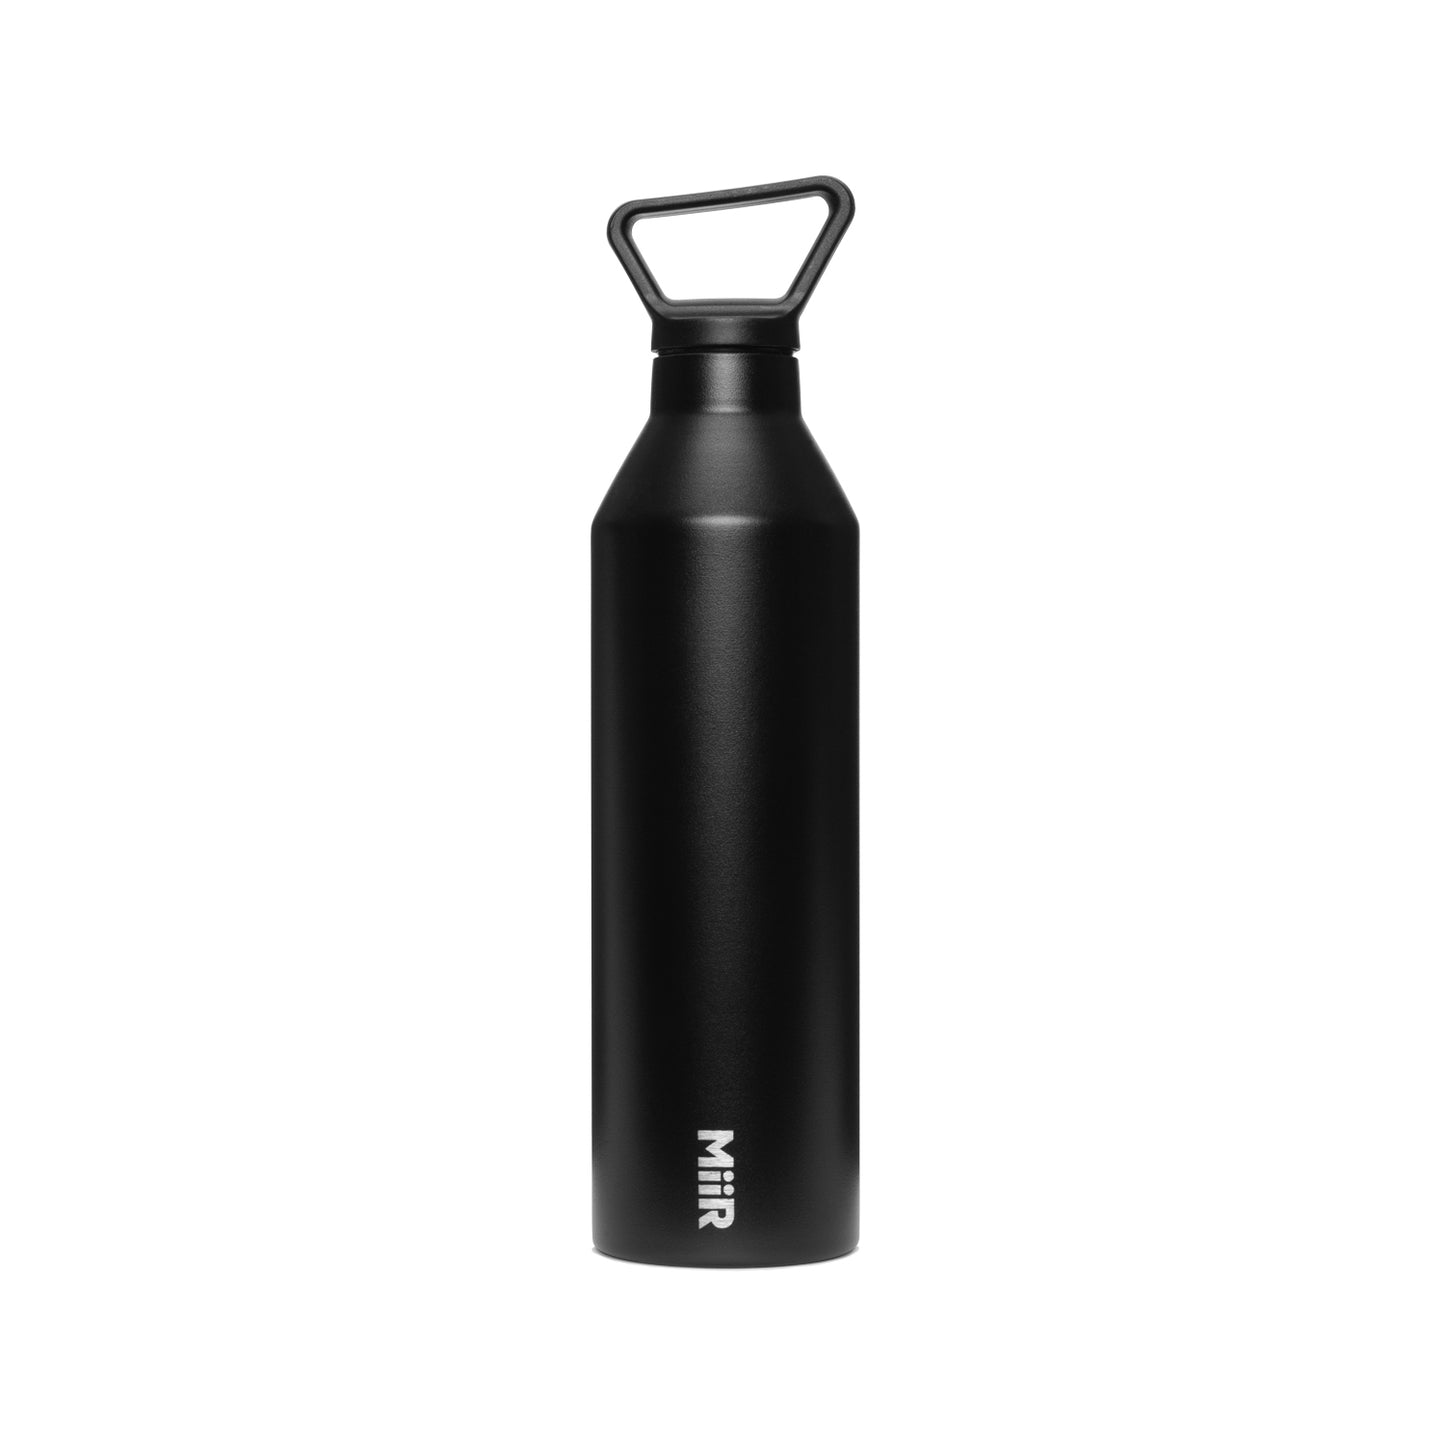 Insulated Water Bottle Black White Small Size Metal Travel New